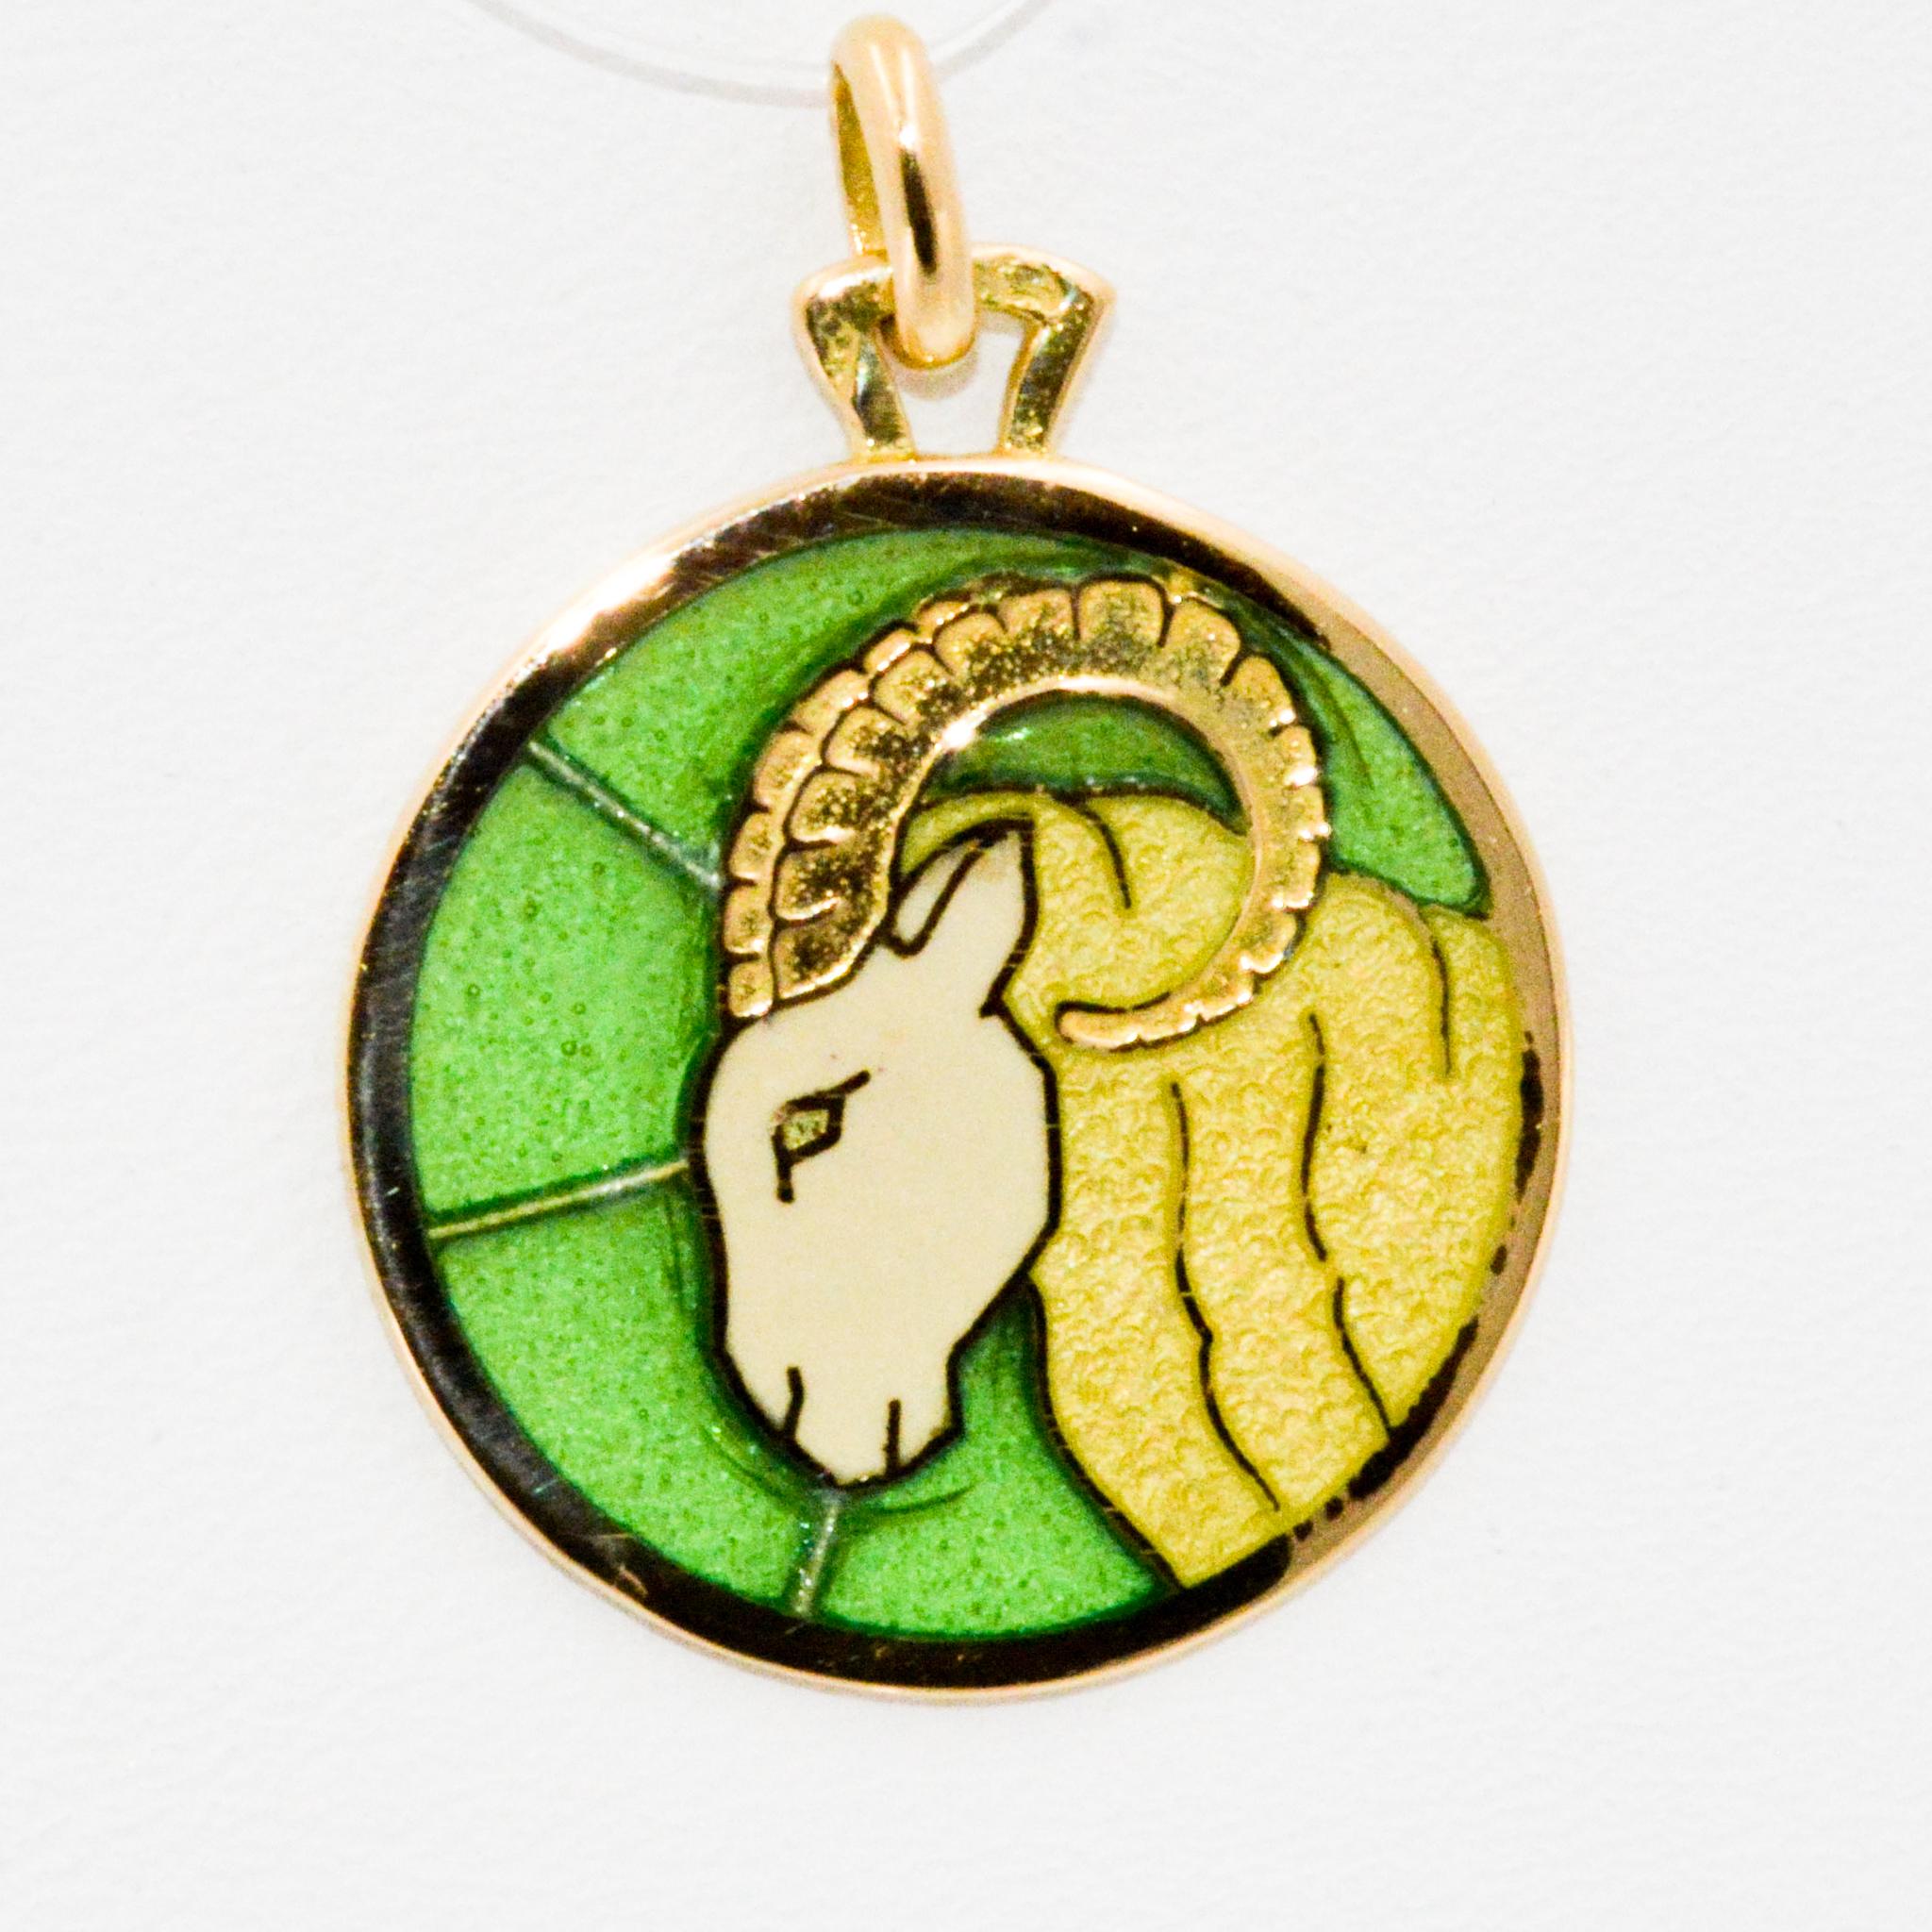 This plique a jour Aries pendant is light as a feather with intricate detailing in 18 karat yellow gold and handmade enameled glass showcasing a magnificent ram. This is the perfect gift for the Aries in your life. The pendant measures 20mm in